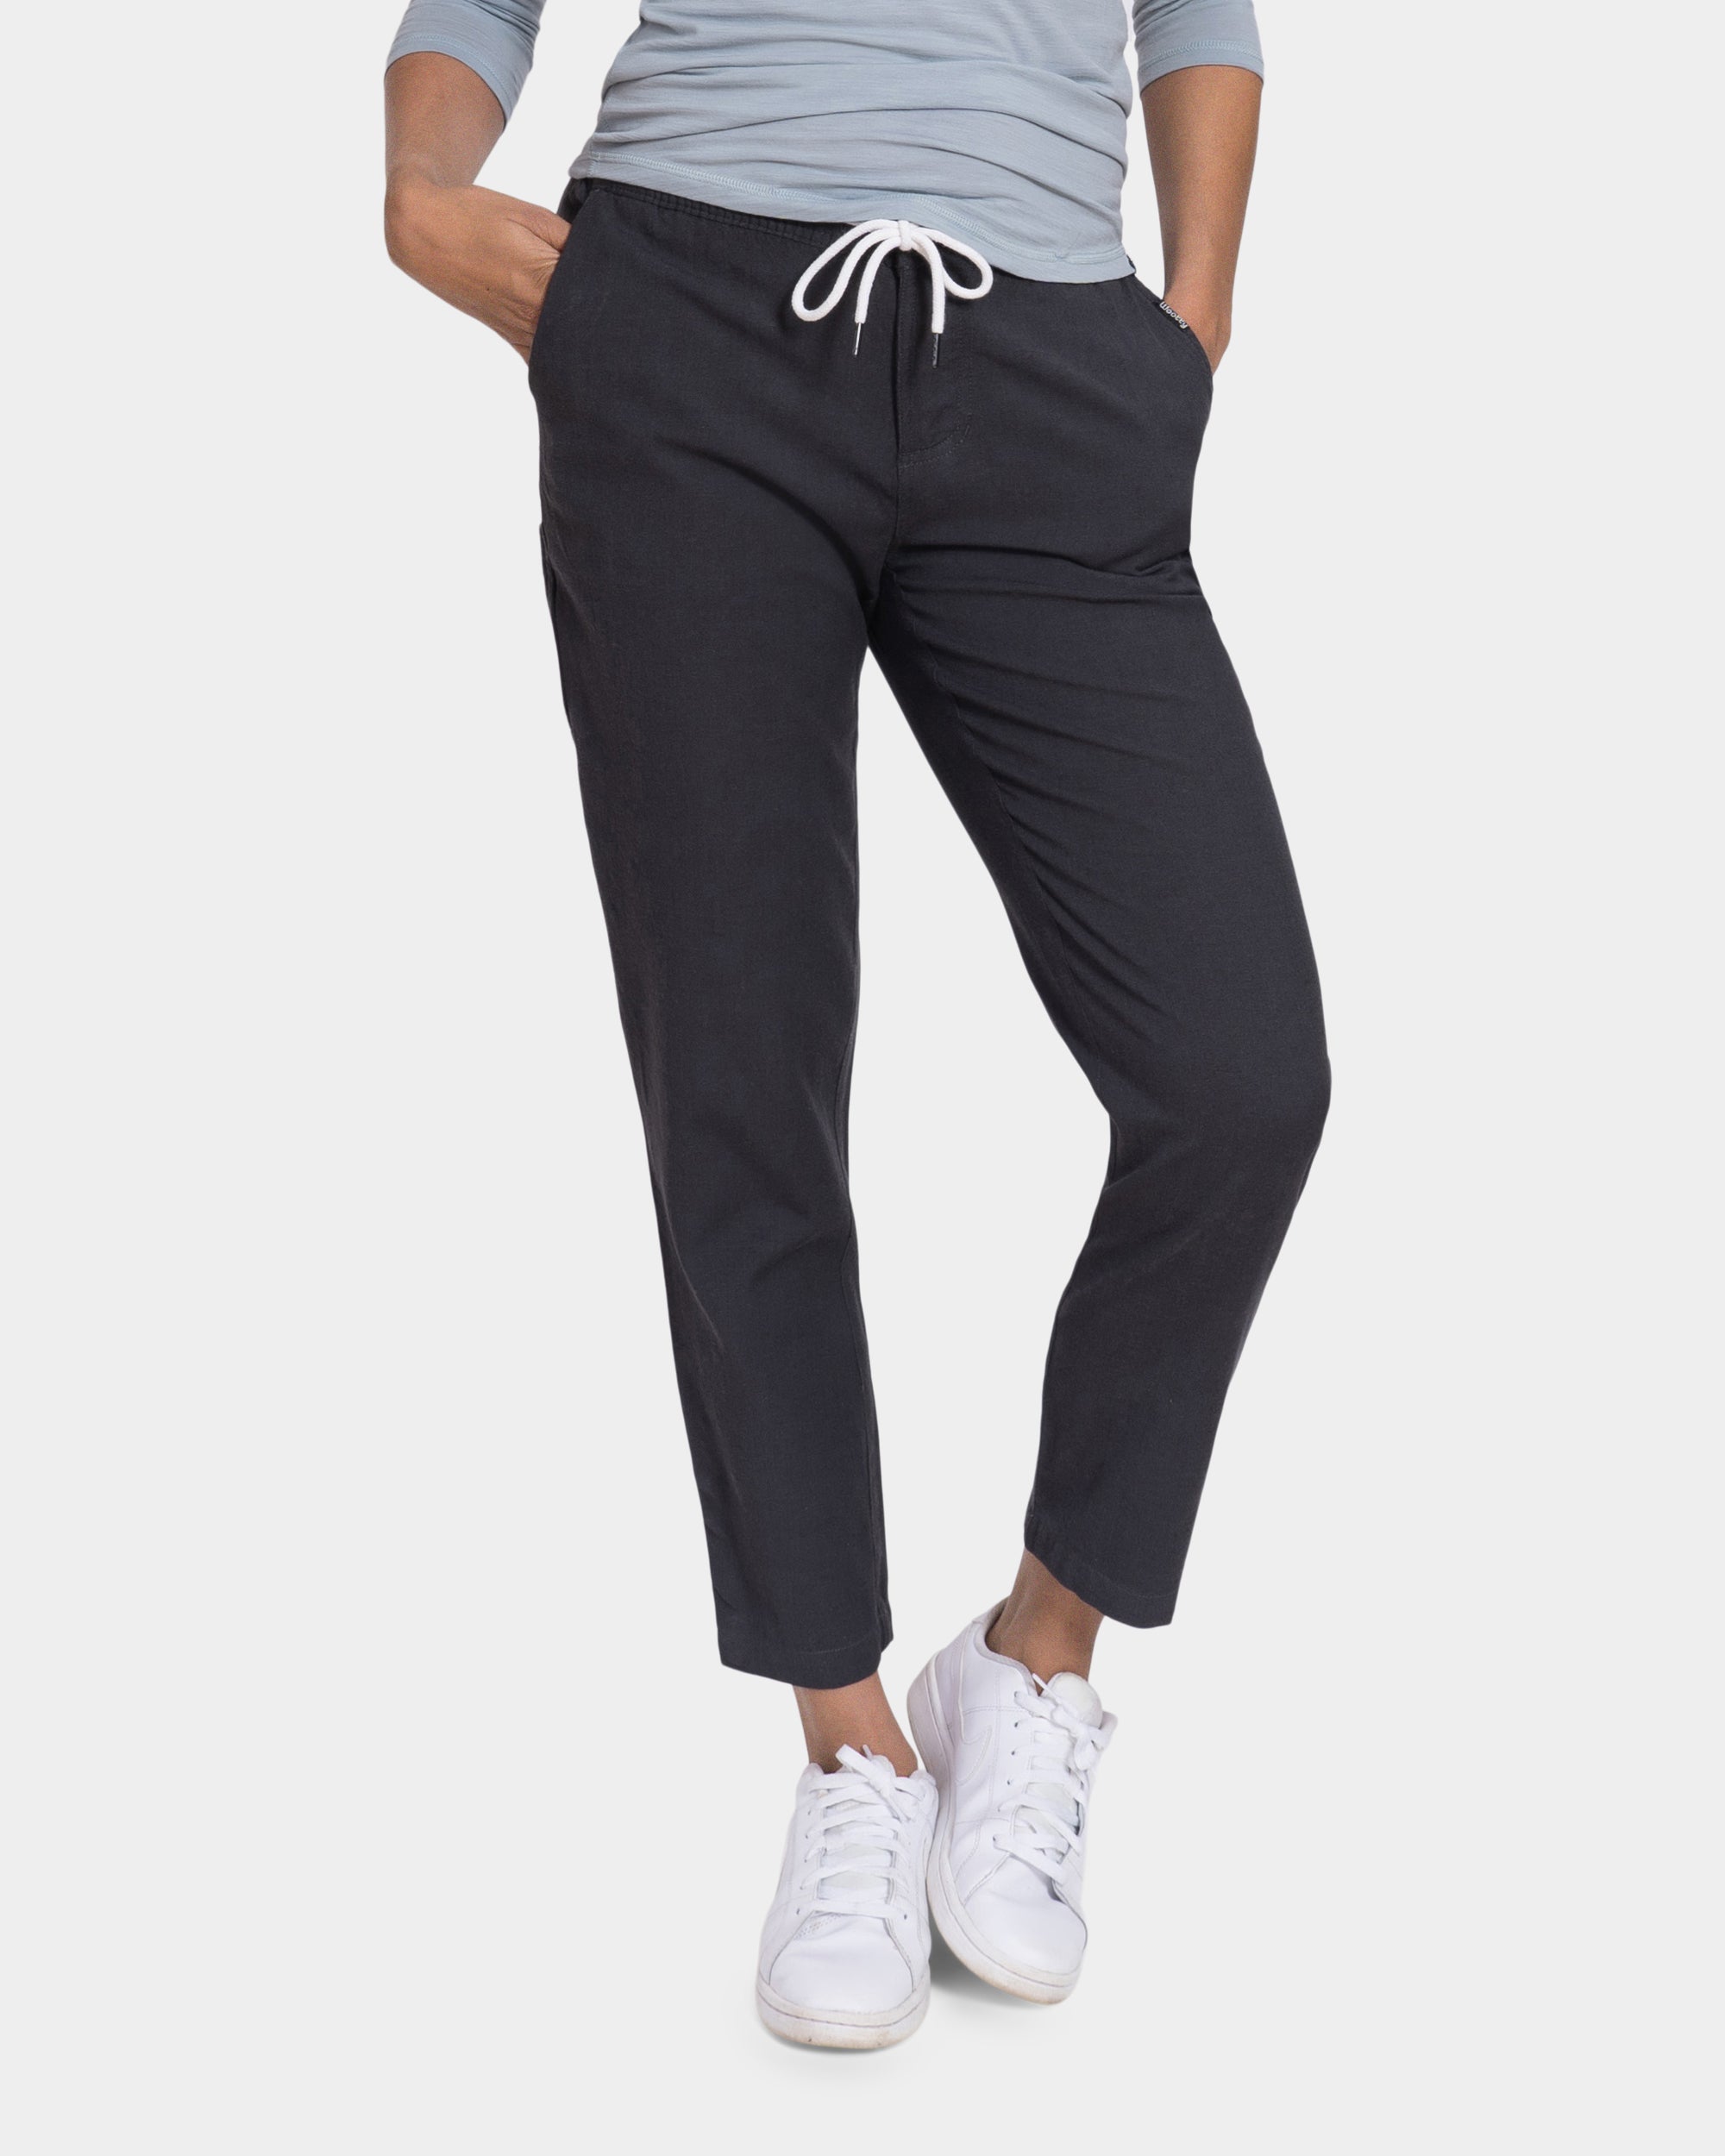 Women's Pull-on Weekender Soft Pant